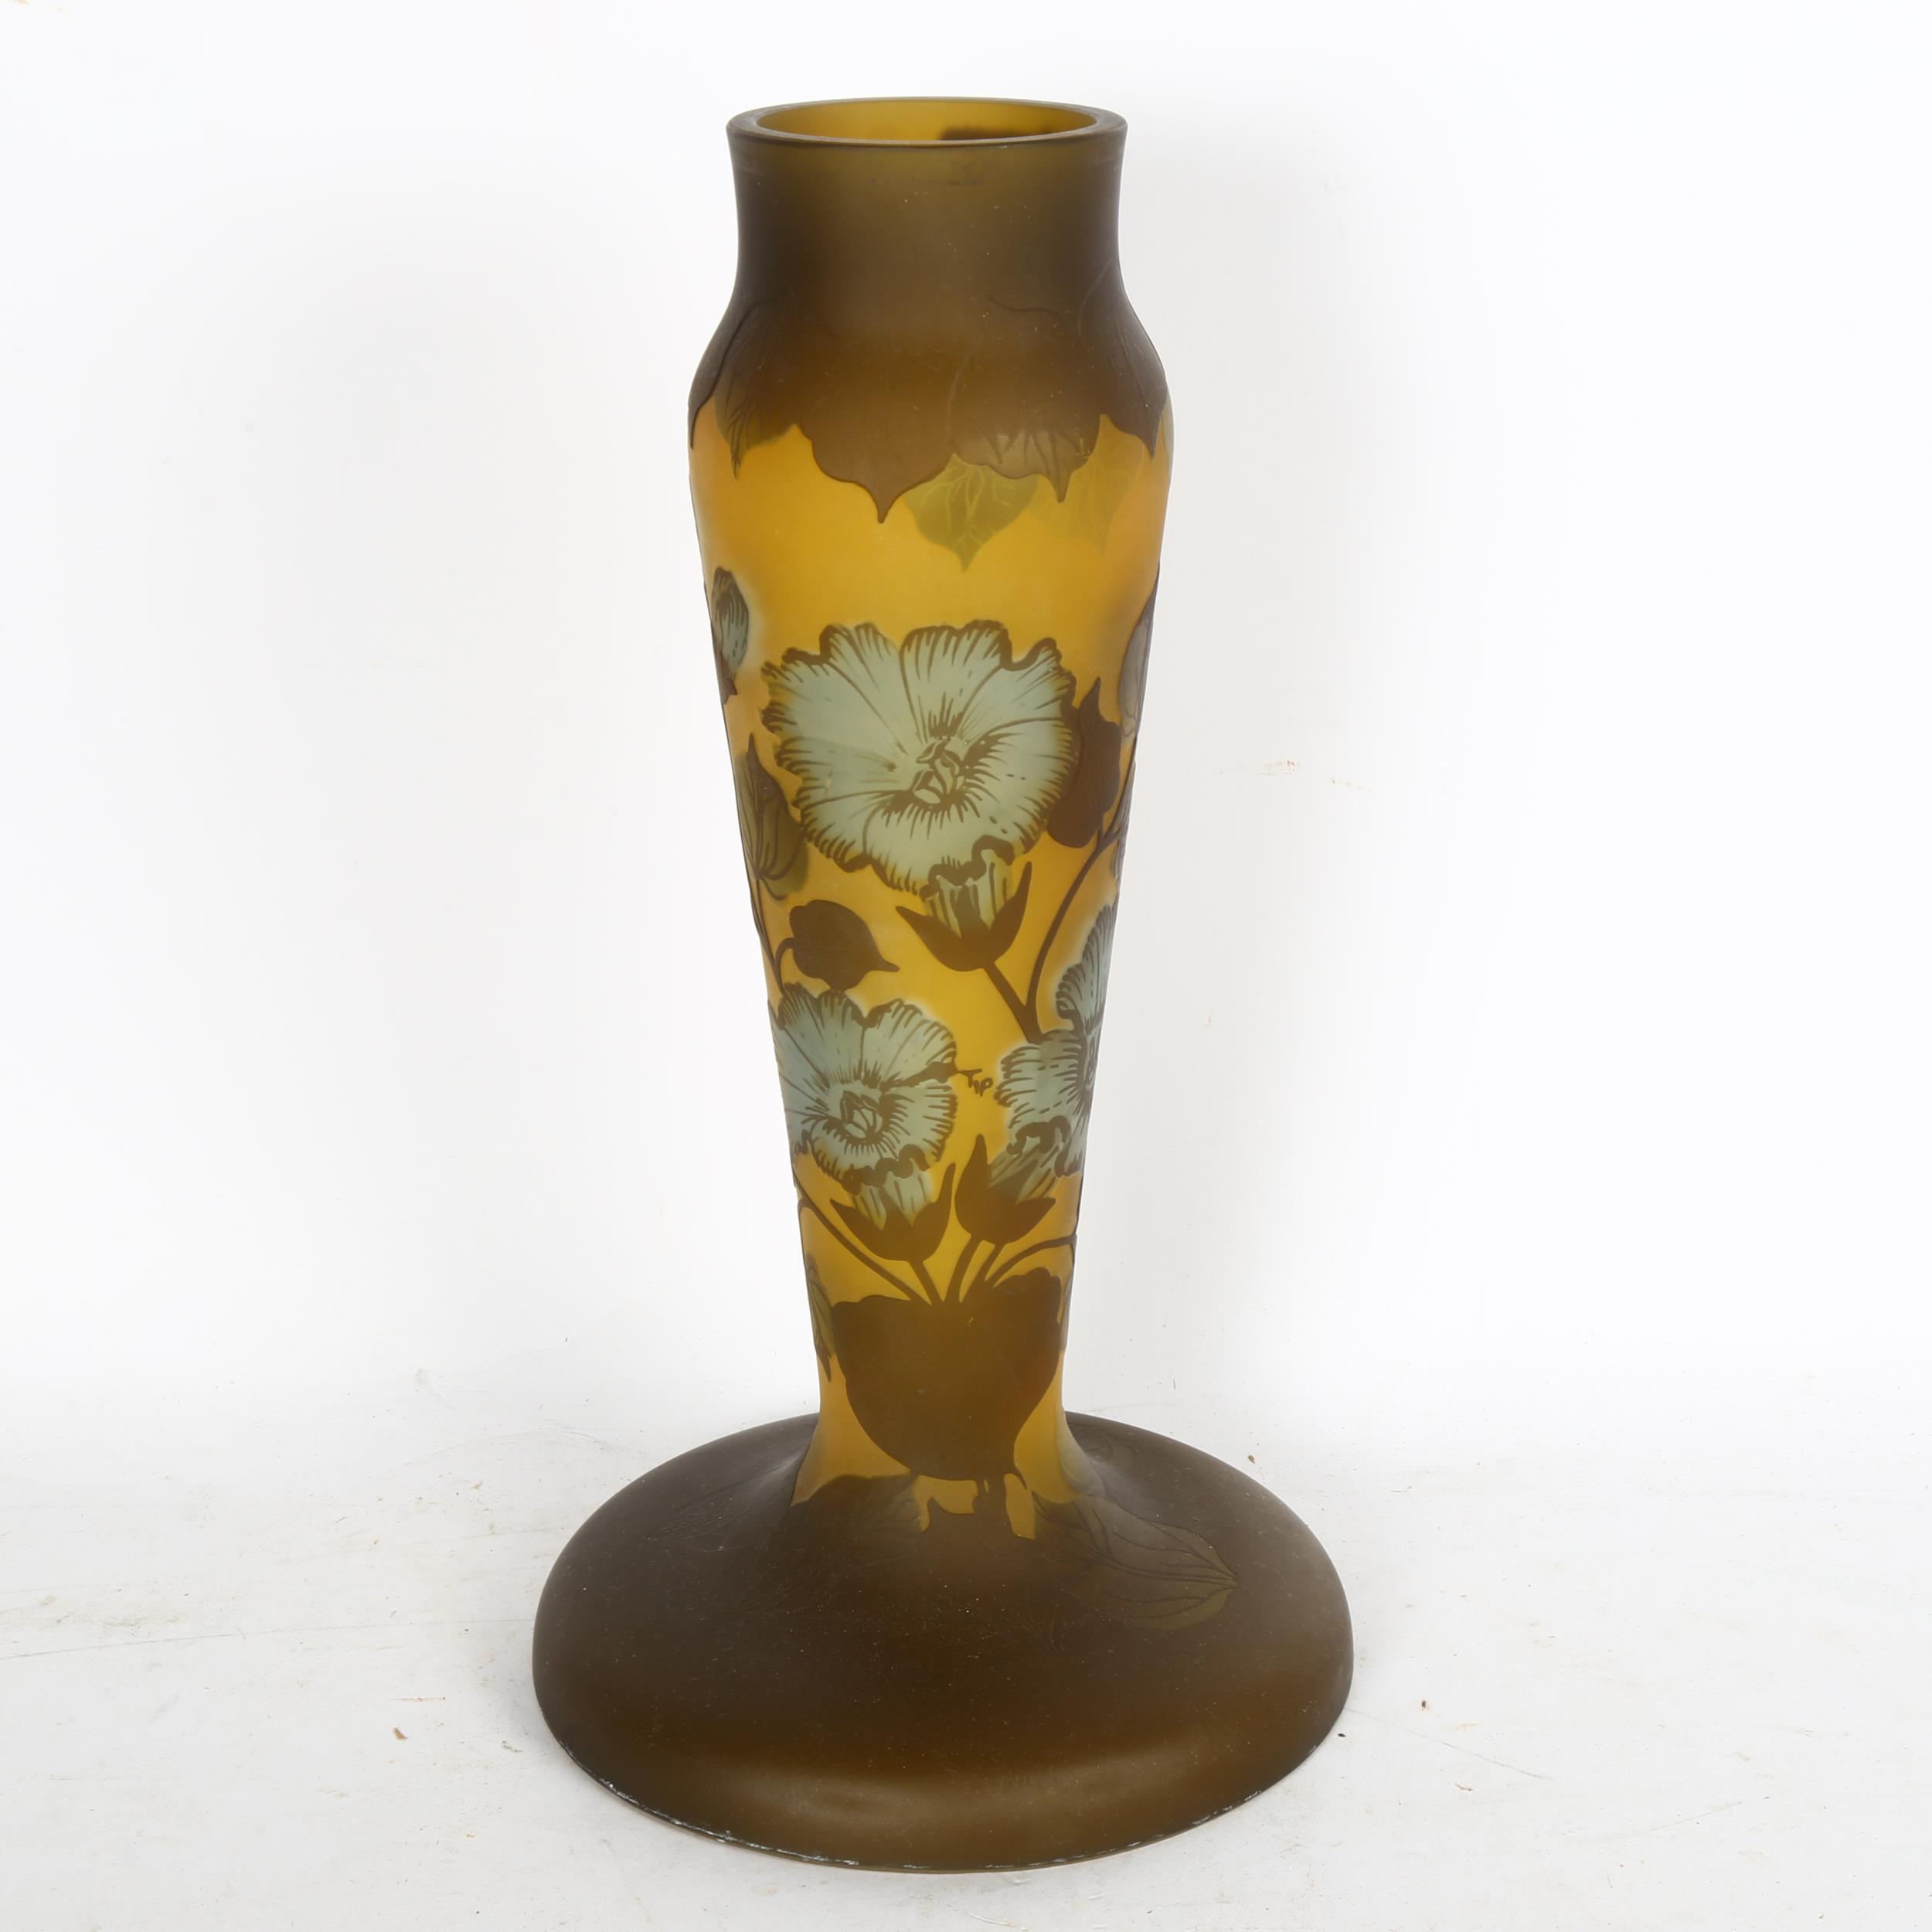 A Galle style glass vase with stylised floral design, 33cm